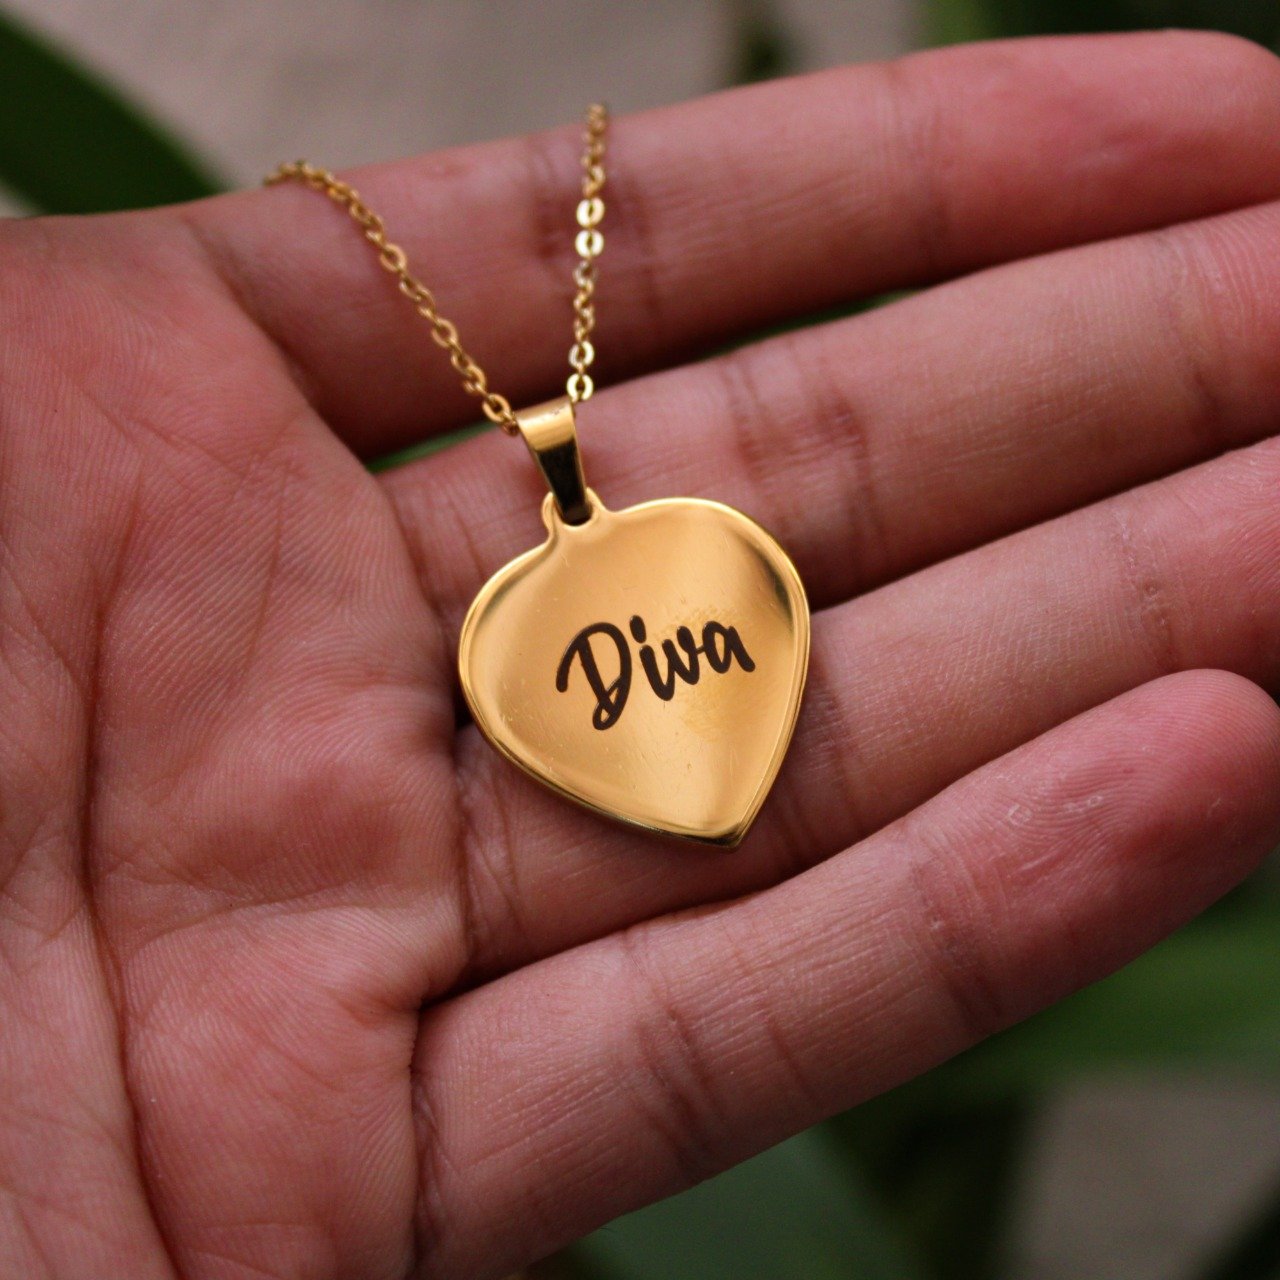 Personalized Arabic Name Necklace in 18k Gold Vermeil - MYKA